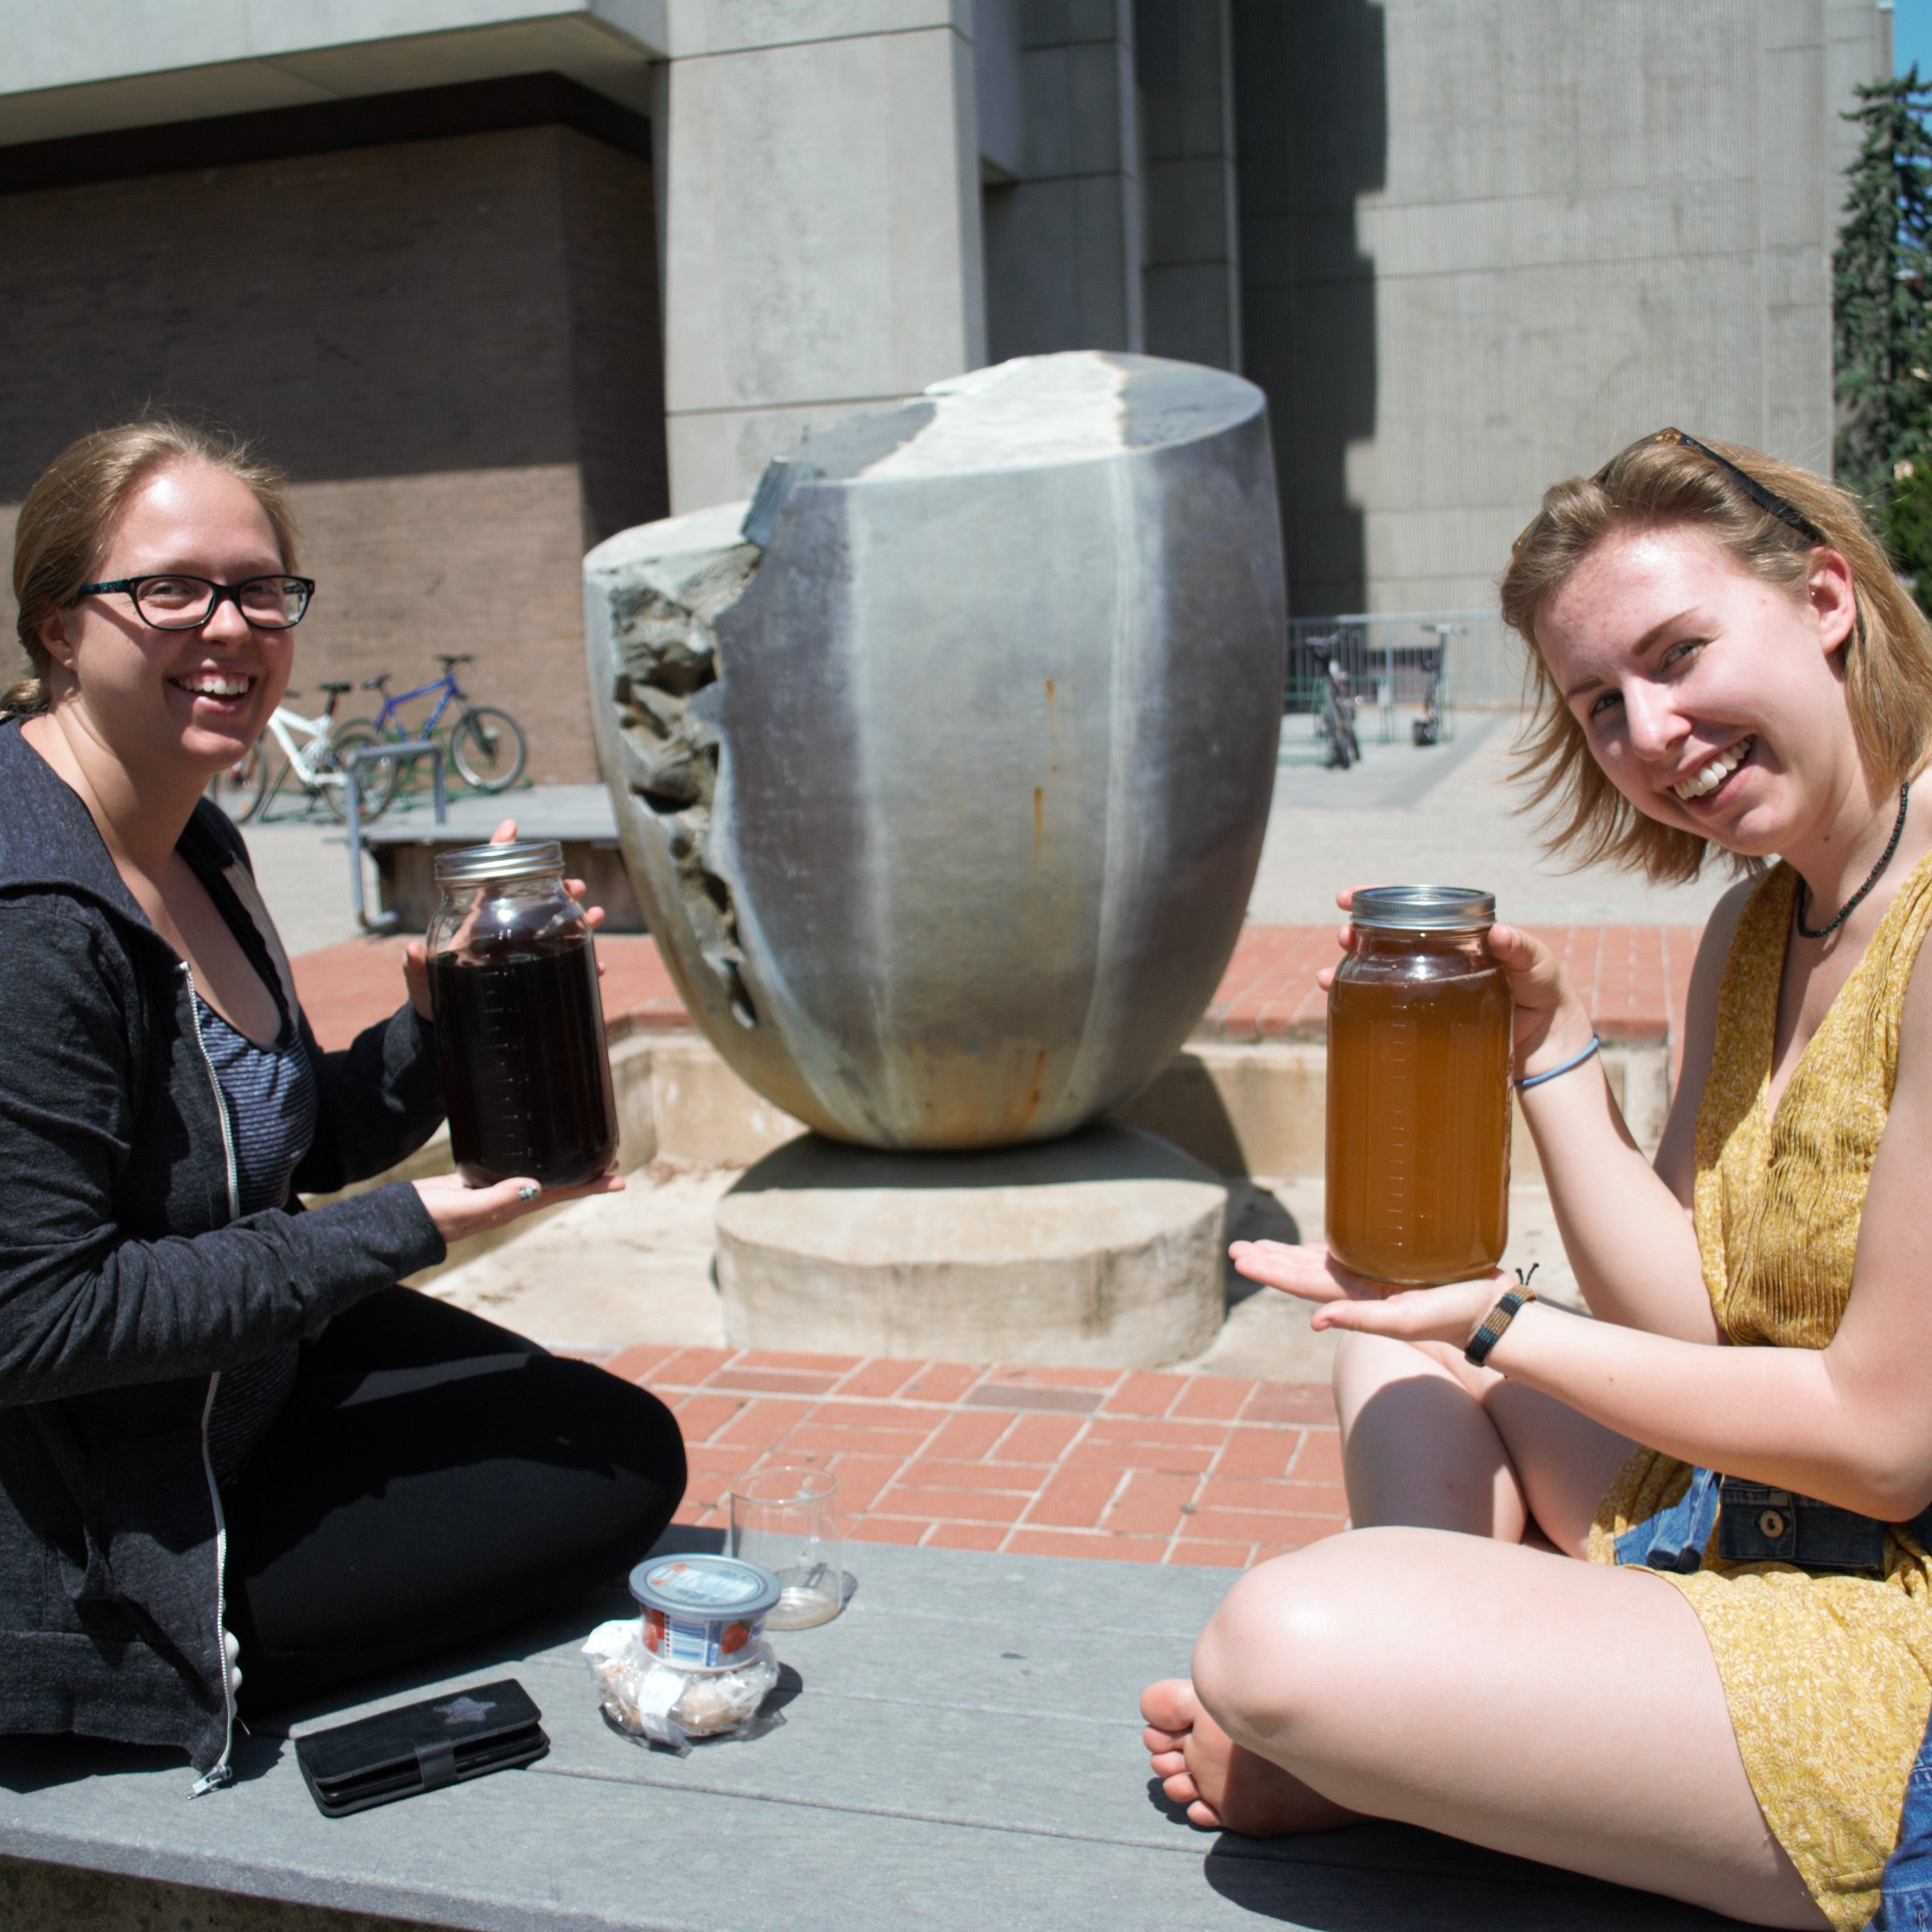 Foregound: Two women sit on a bench holding up large mason jars of tea. Background: Grey fountain of an egg with a large crack